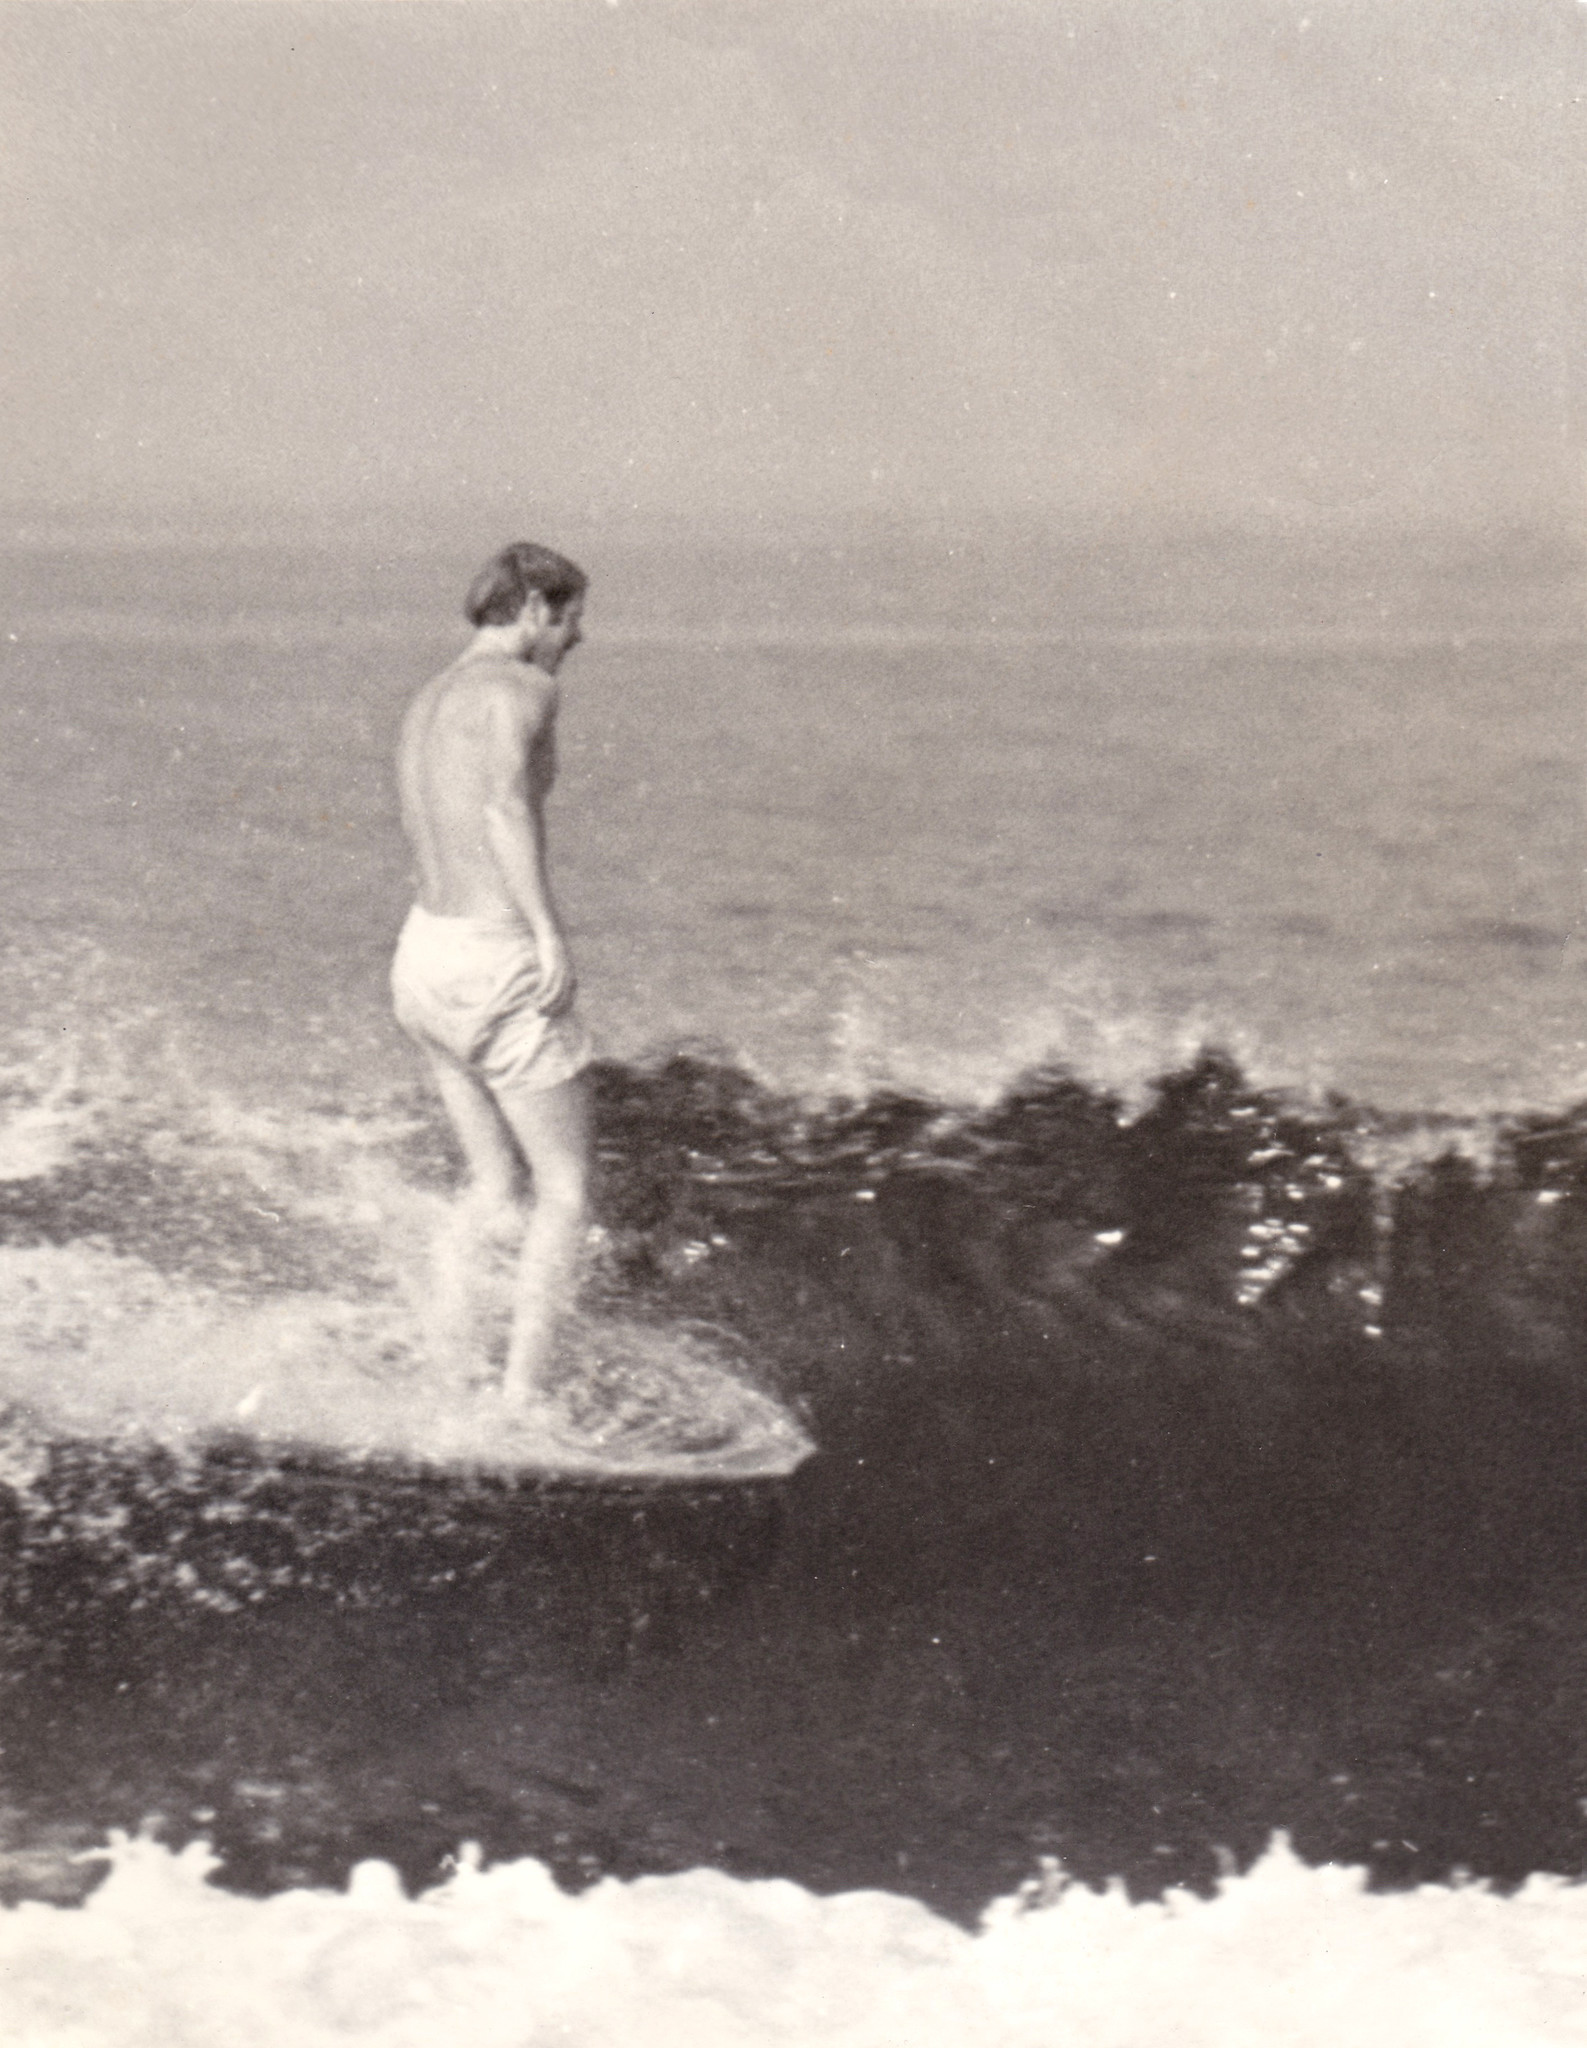 Bill Andrews rides a wave in earlier days.